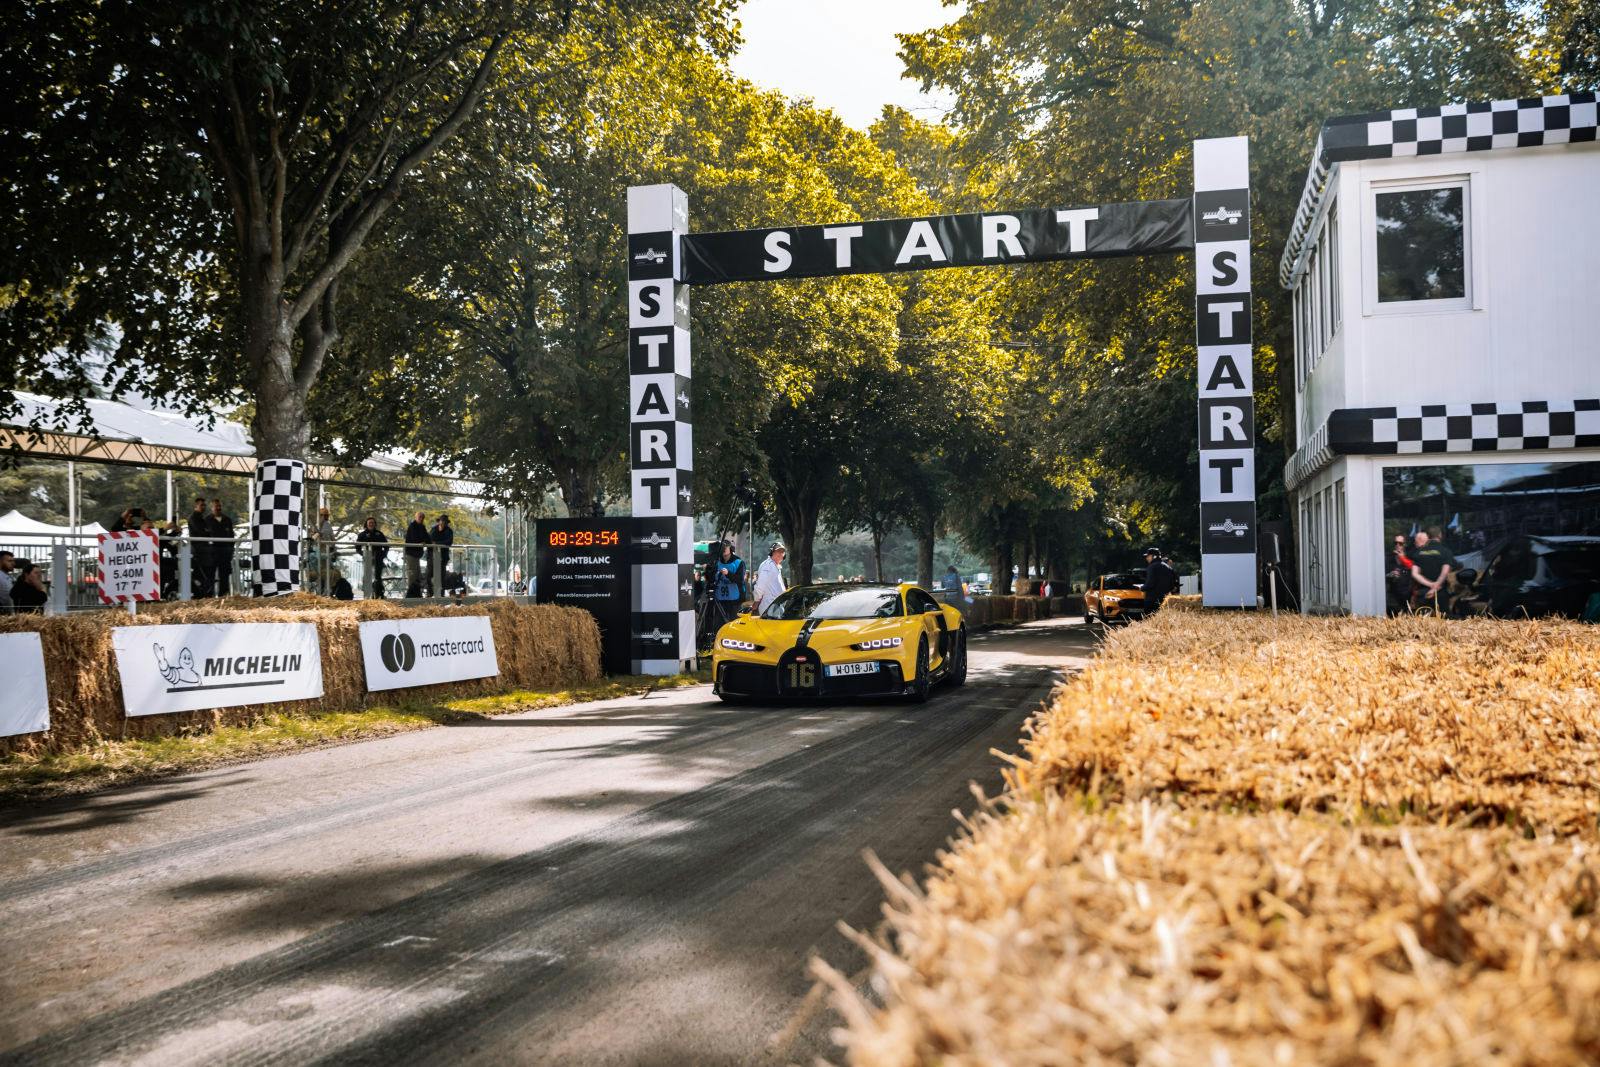 The Bugatti Chiron Pur Sport about to provide with a glimpse of what it is capable of on the 1.86km of the Hill Climb at Goodwood Festival of Speed 2021.